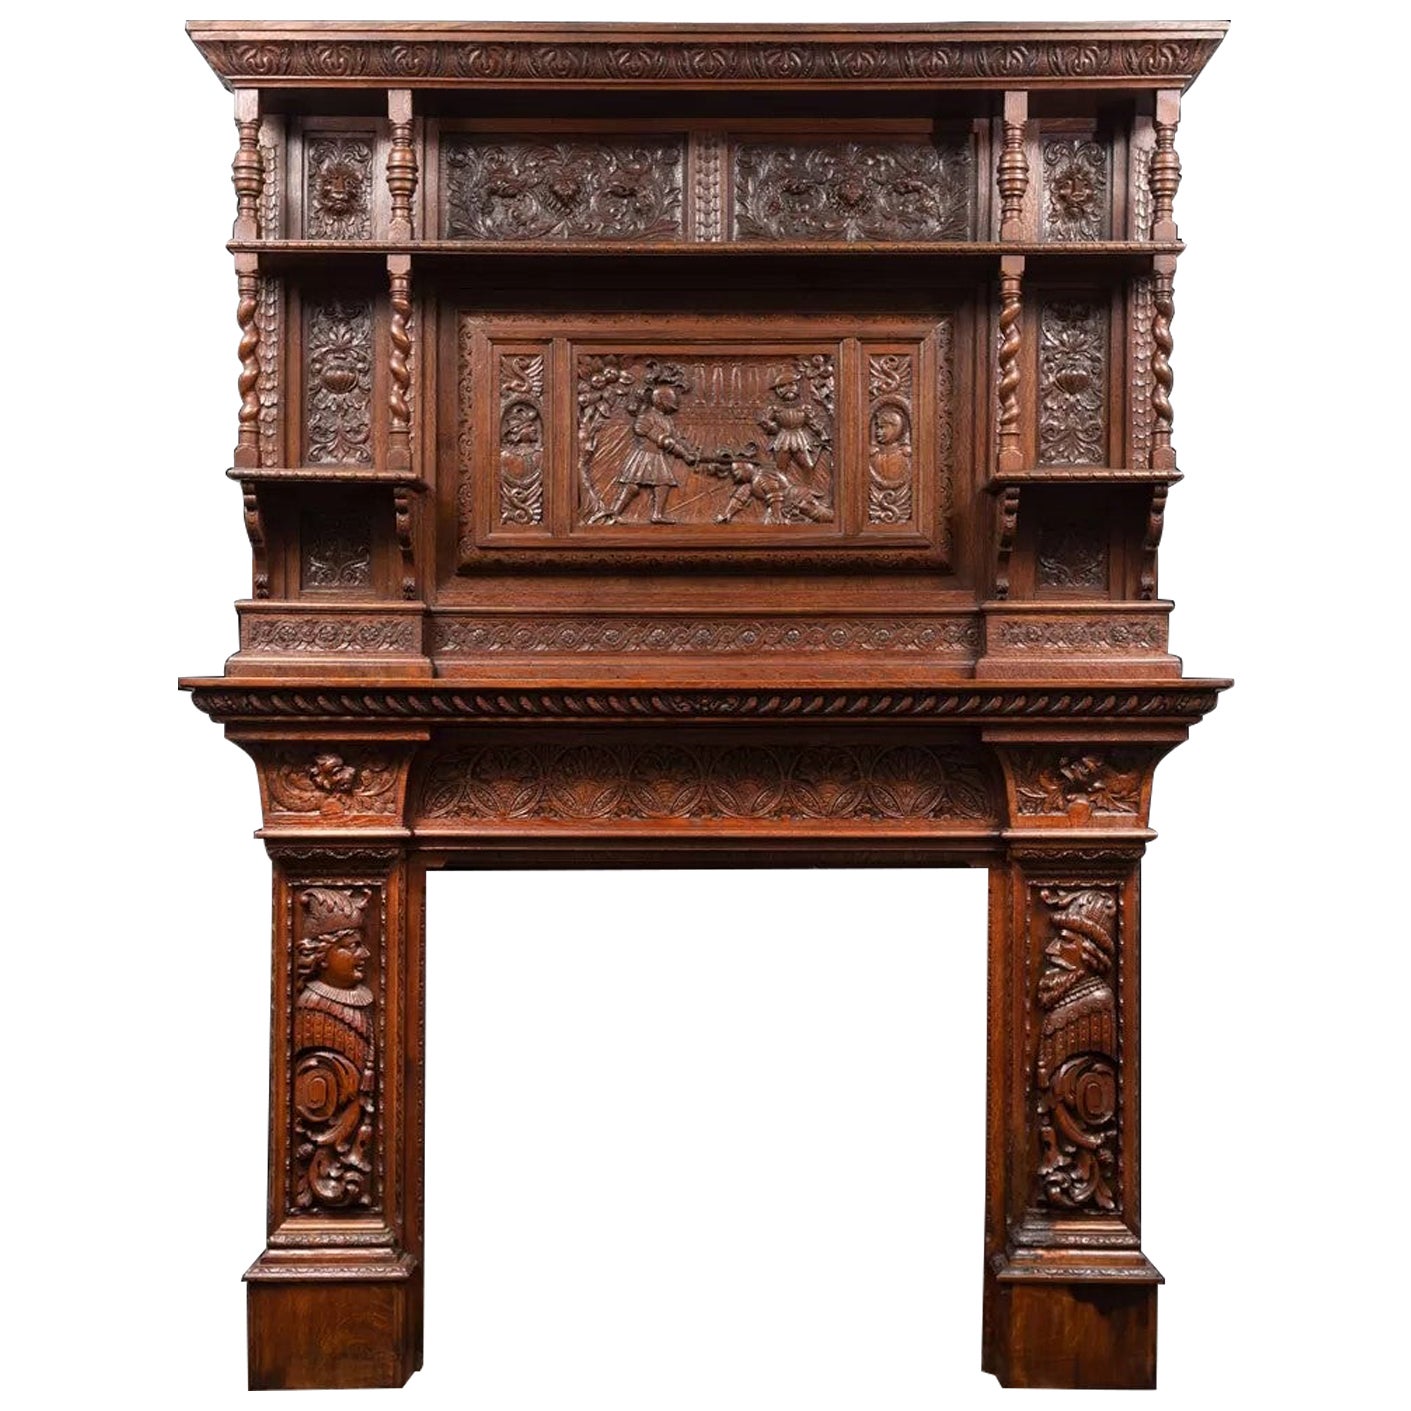 An antique oak fireplace surround, made in the Jacobean style. For Sale